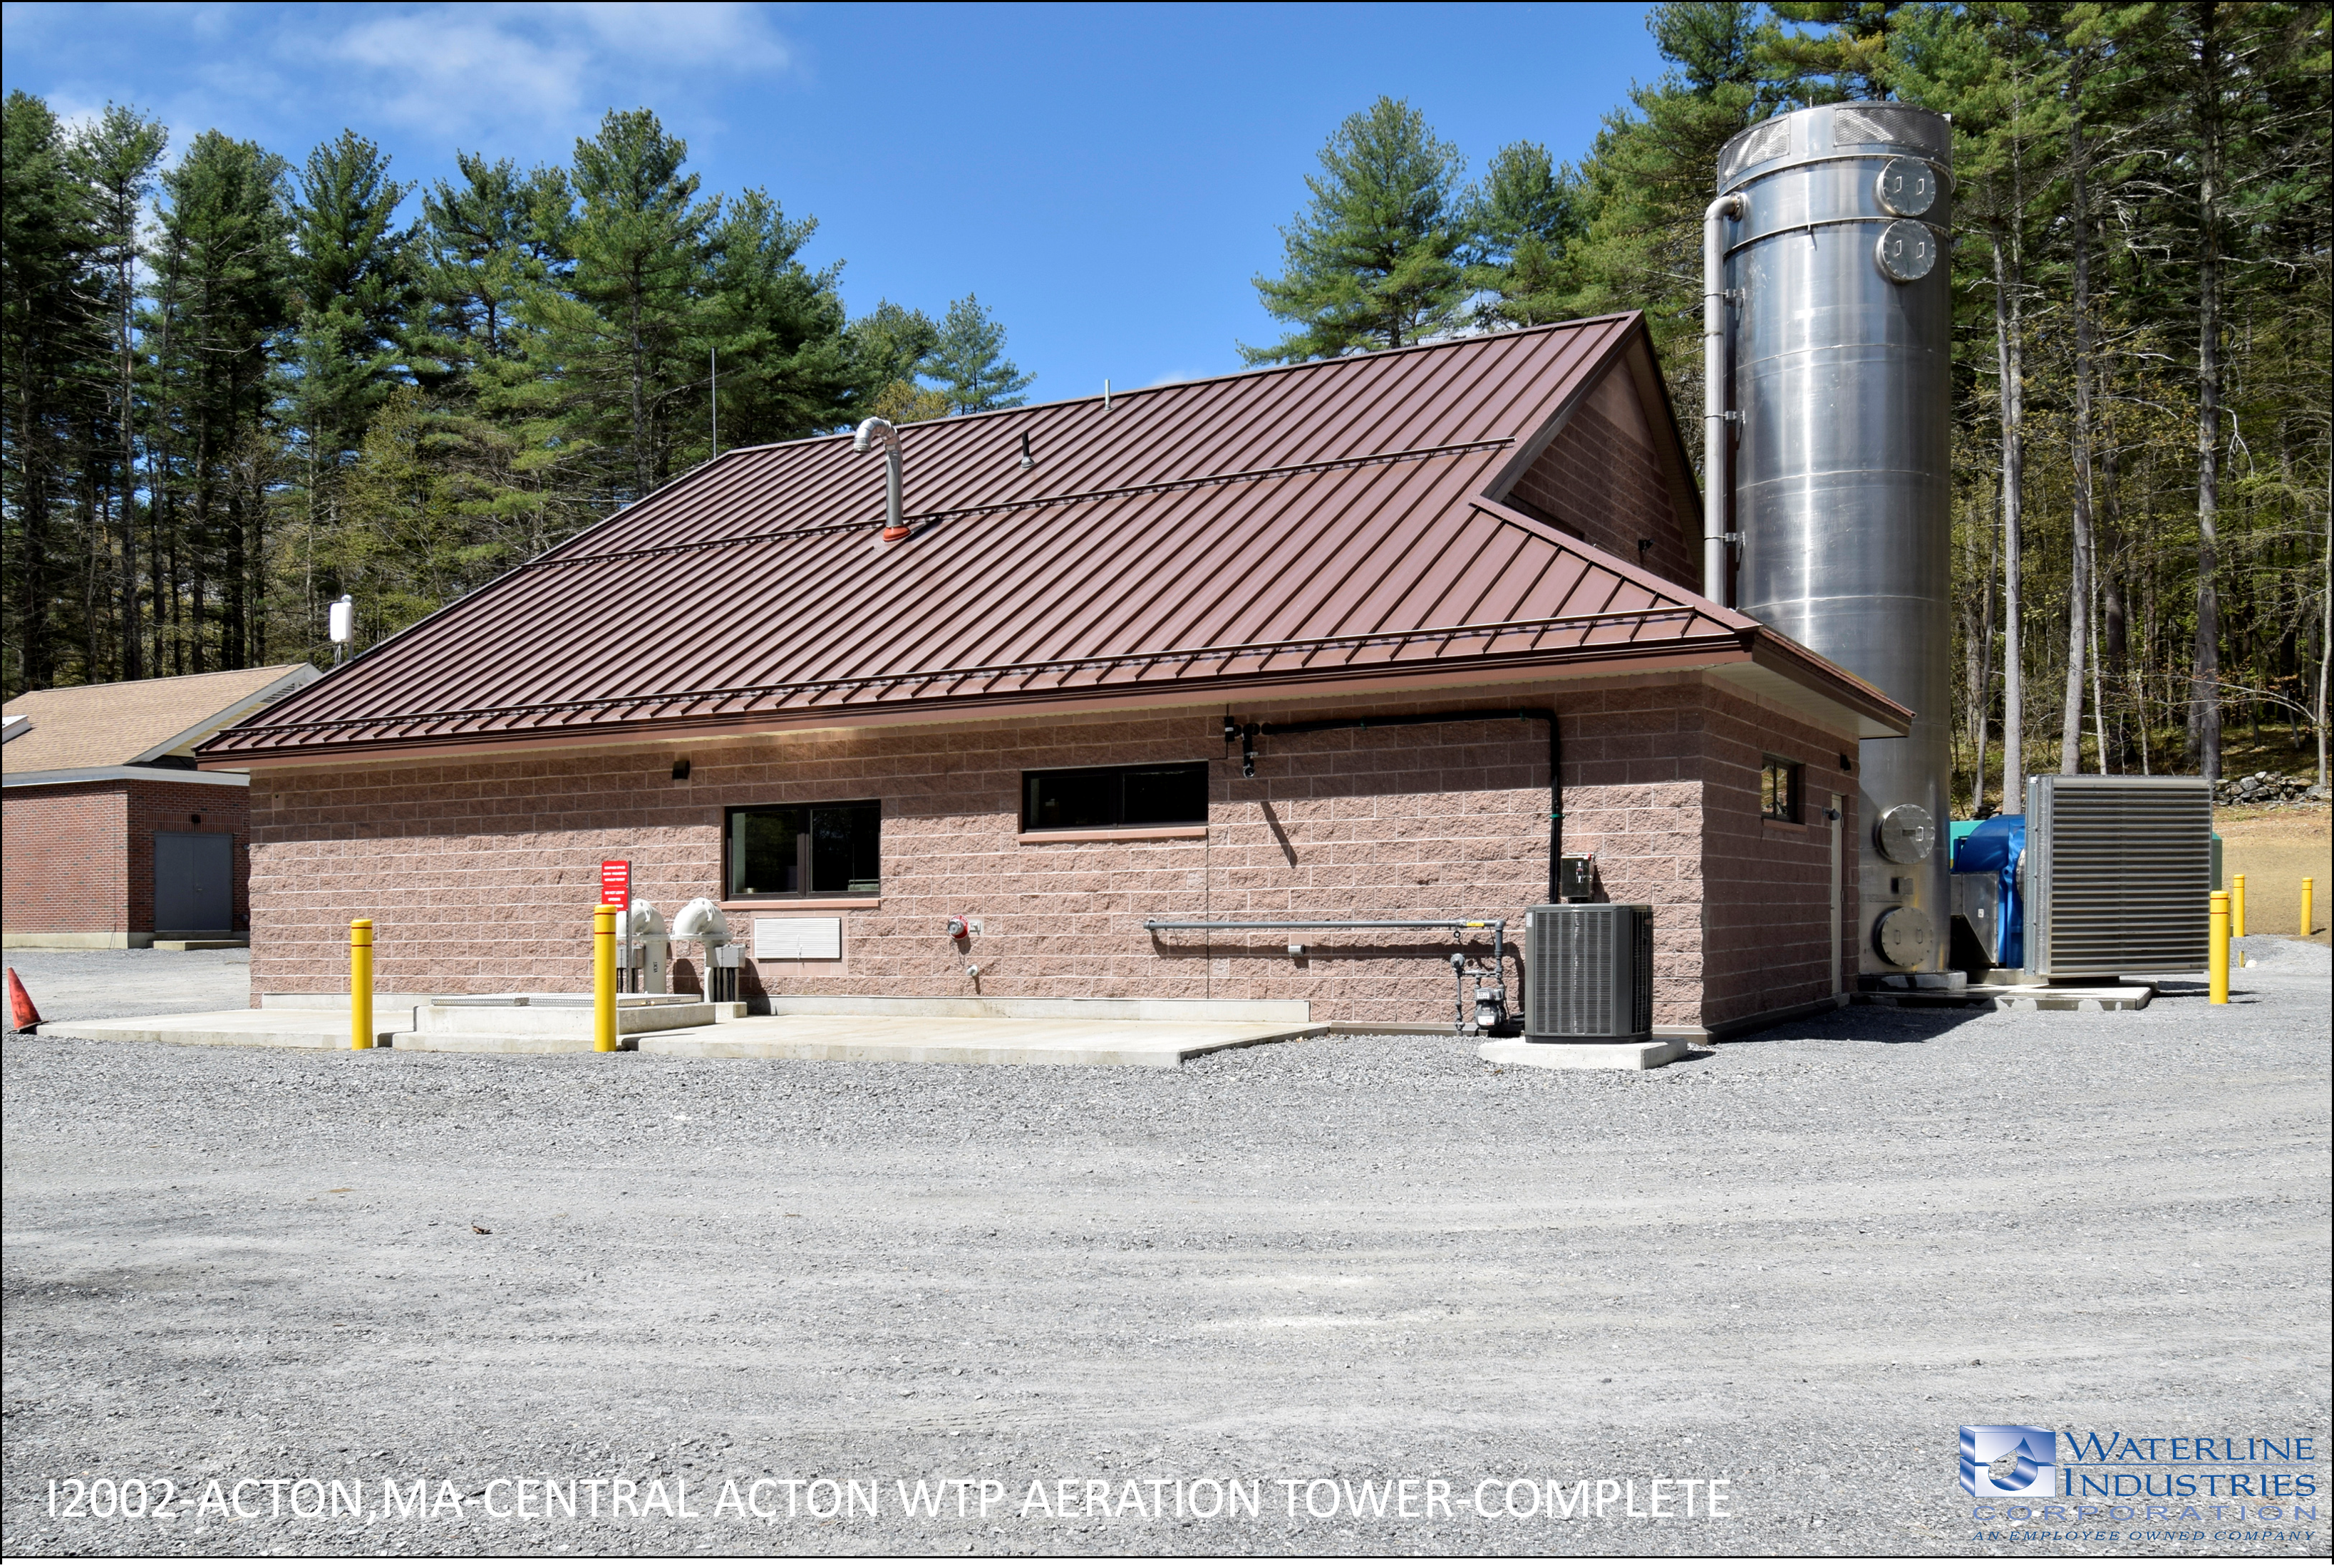 I2002-ACTON,MA-CENTRAL ACTON WTP AERATION TOWER-COMPLETE